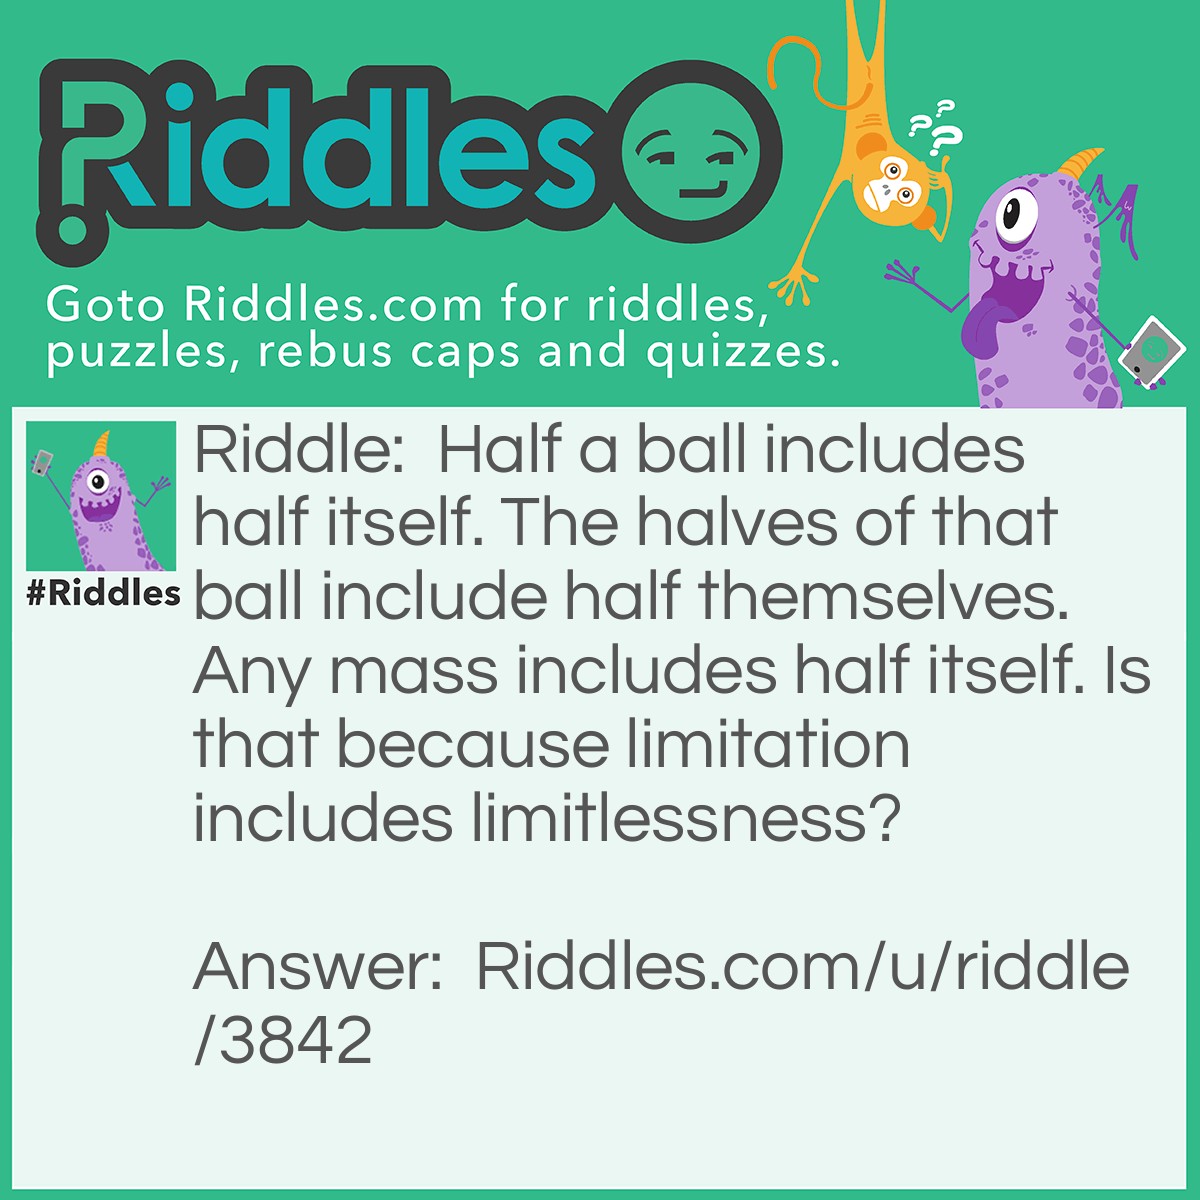 Riddle: Half a ball includes half itself. The halves of that ball include half themselves. Any mass includes half itself. Is that because limitation includes limitlessness? Answer: Perhaps perhaps.